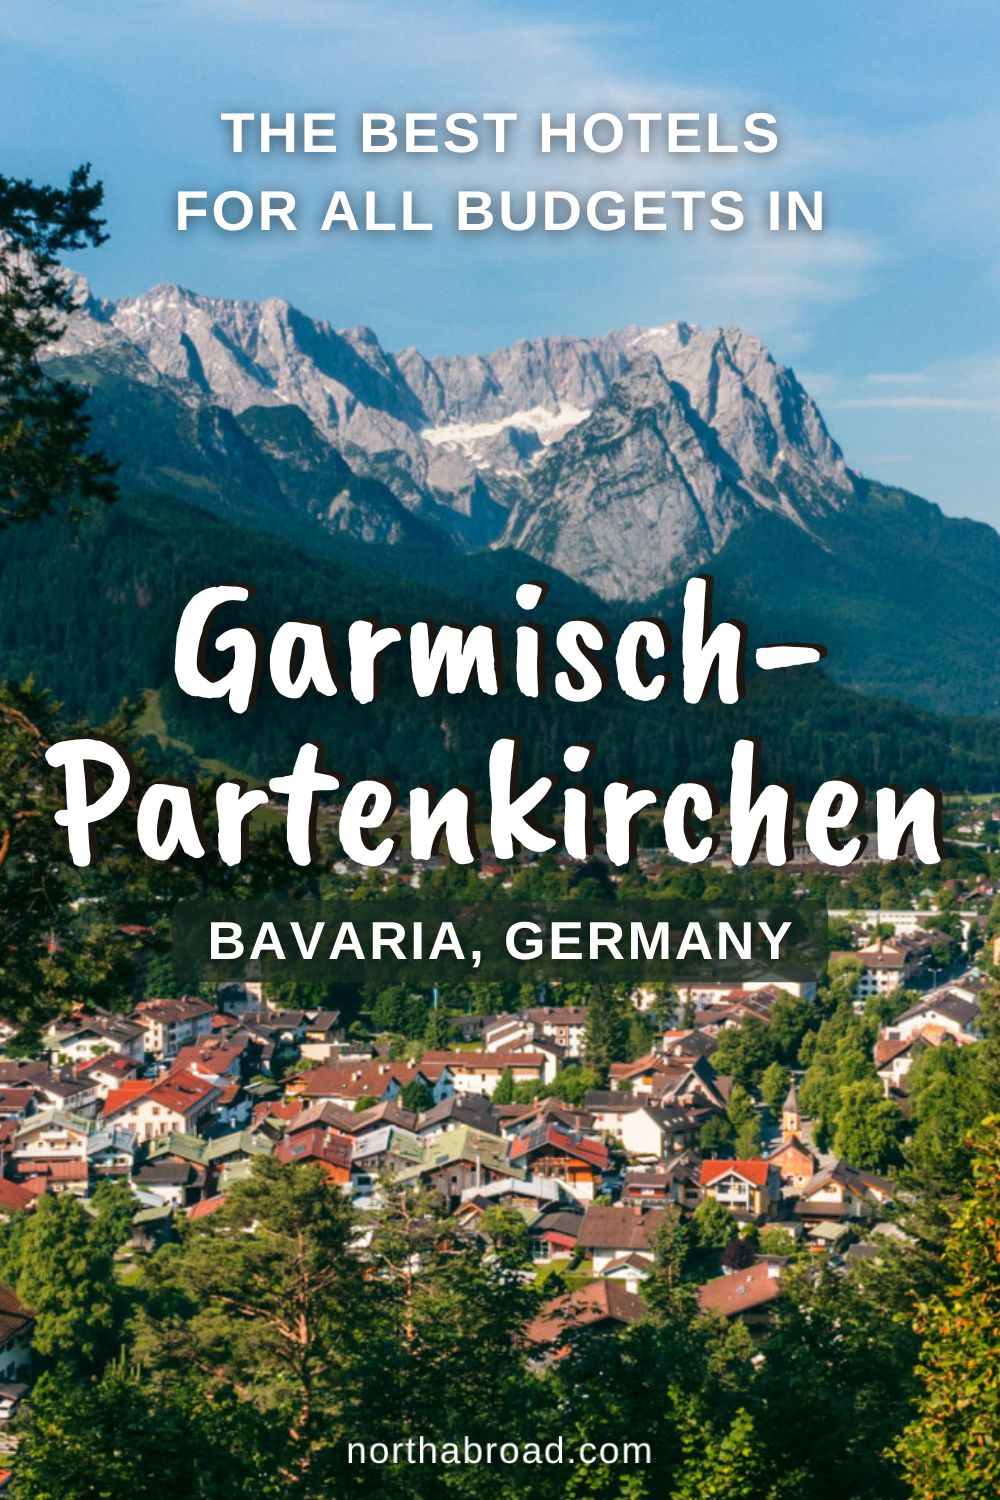 Where to Stay in Garmisch-Partenkirchen: 11 Best Hotels for All Budgets